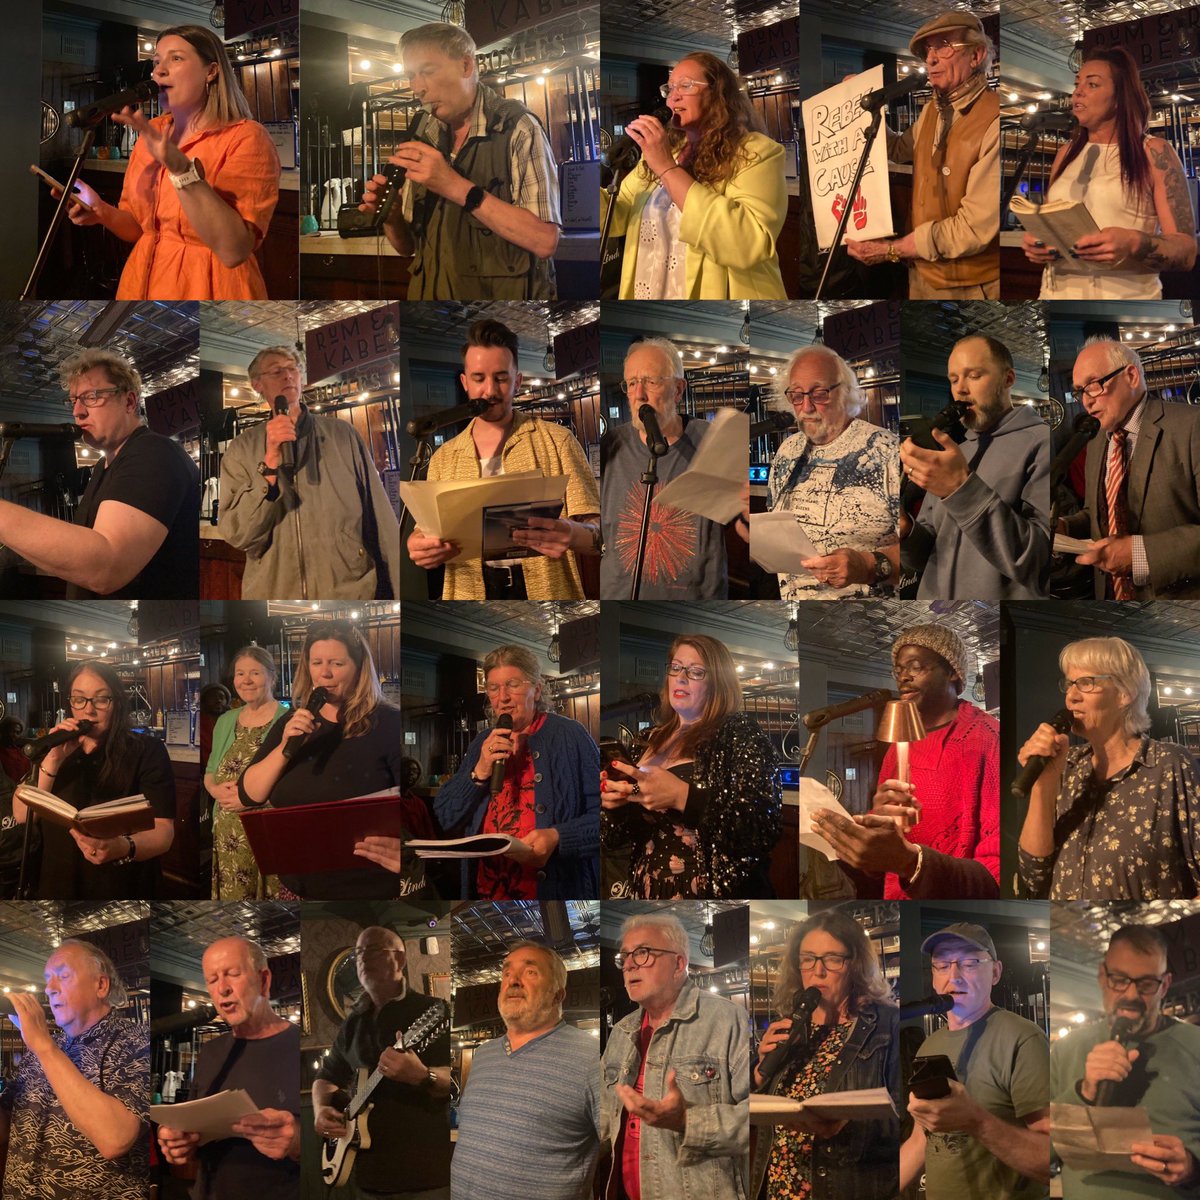 Thank you so much to the 27 other Liver Bards who performed at ‘The Pool of Life’ featuring Lorna Rose Gill at Ma Boyle’s on Tuesday. 
You spoke your truths and listened to others speak theirs…

#LiverBards #poetry #LivLitCycle #LiverpoolReads #LiverpoolSpeaks ：